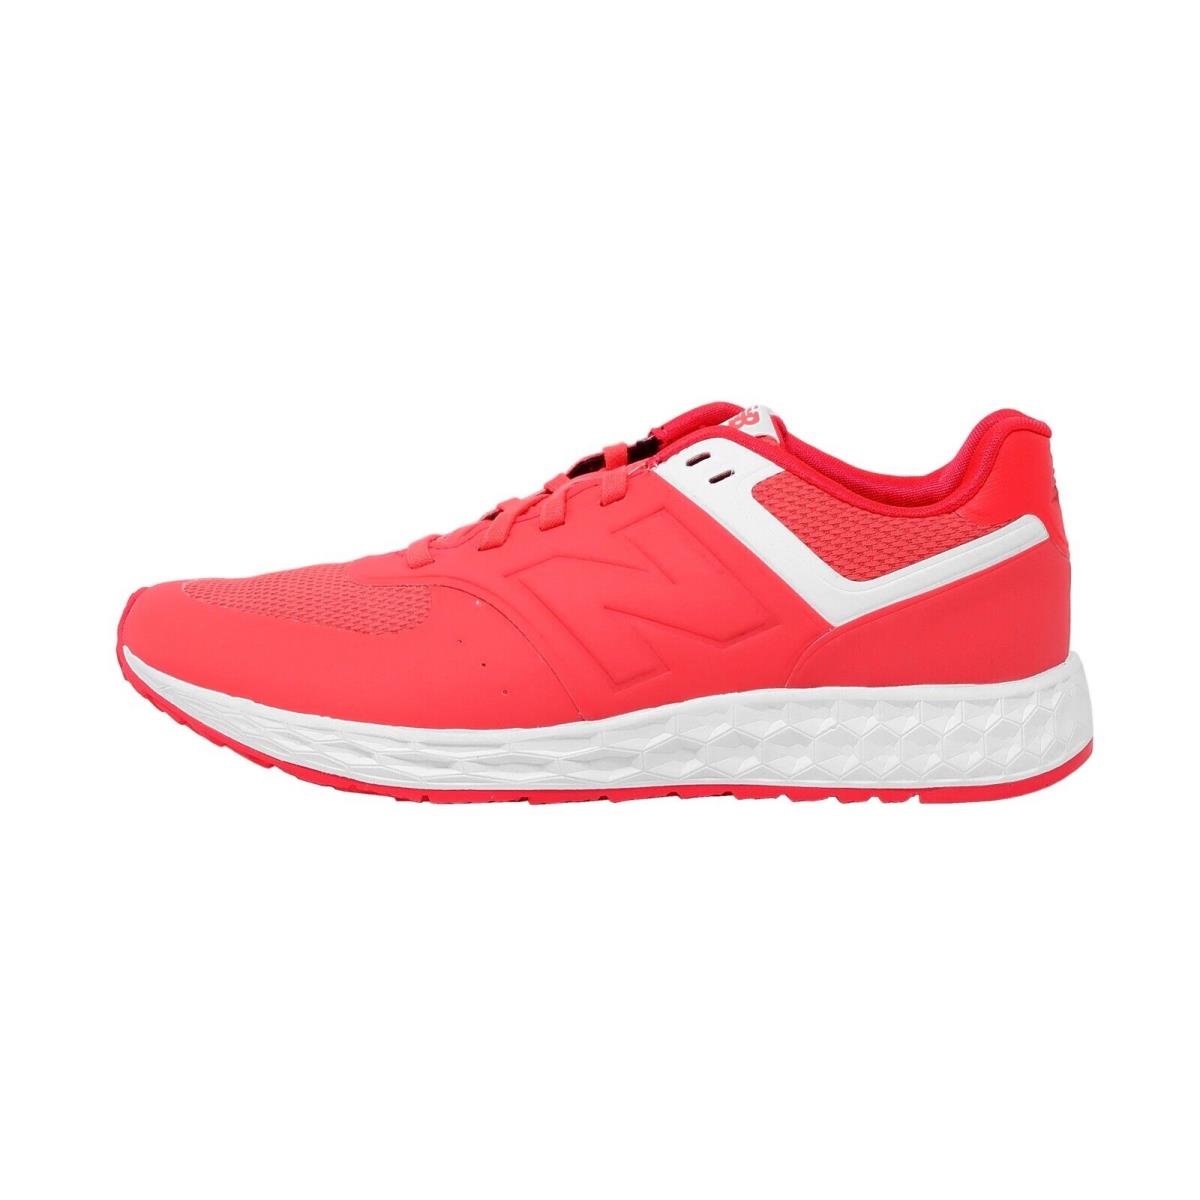 New Balance Women`s Fresh Foam 574 Running Shoes Sneakers WFL574BC - Bright Pink